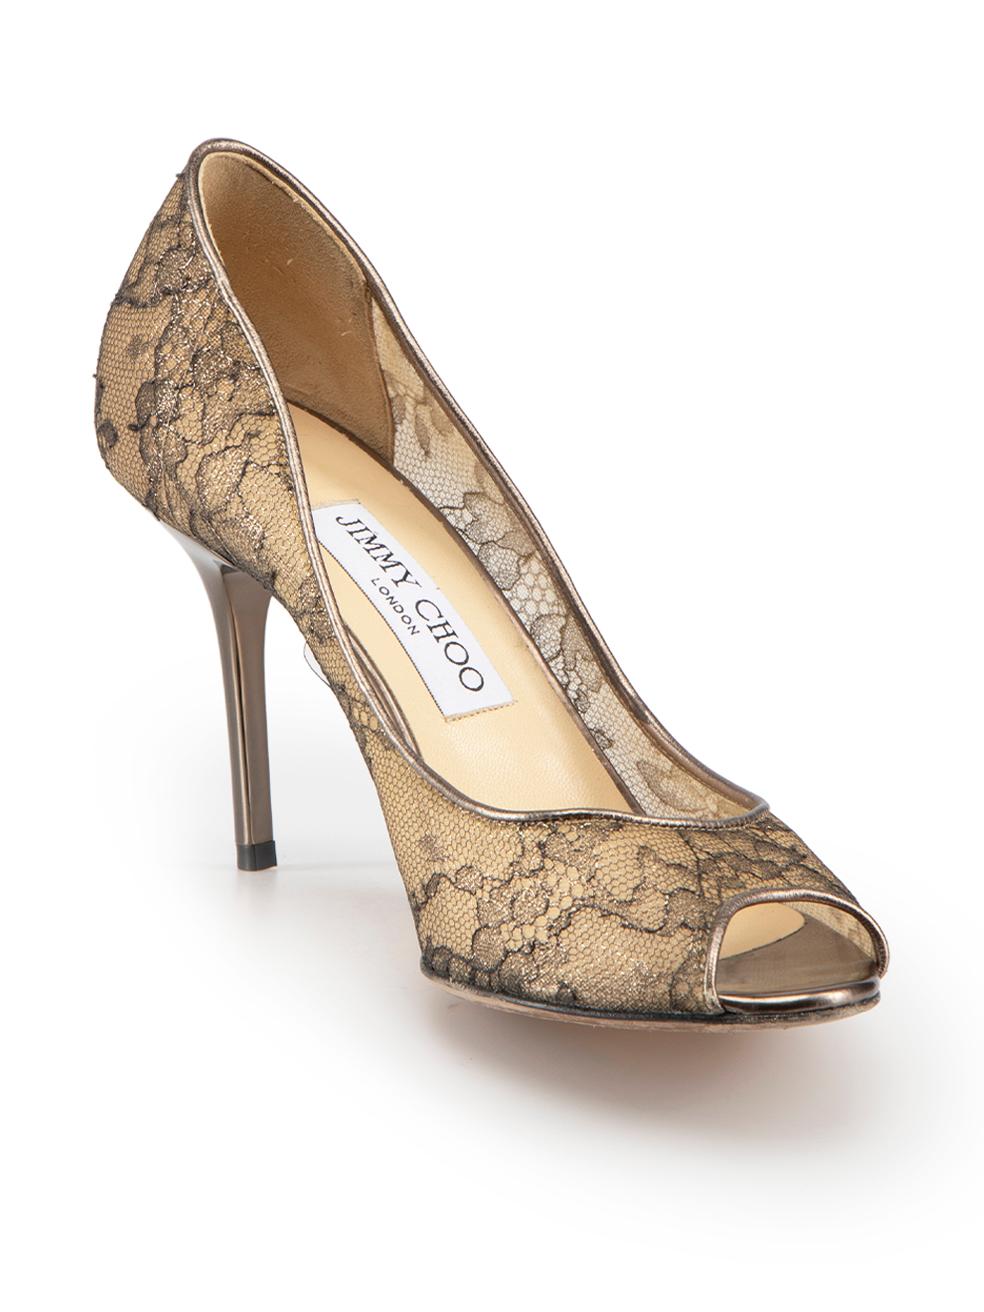 CONDITION is Very good. Minimal wear to heels is evident. Minimal wear to the heels of both shoes with very light scratches on this used Jimmy Choo designer resale item.
 
Details
Bronze
Lace
Slip on heels
Sheer floral lace accent
Peep toe
High